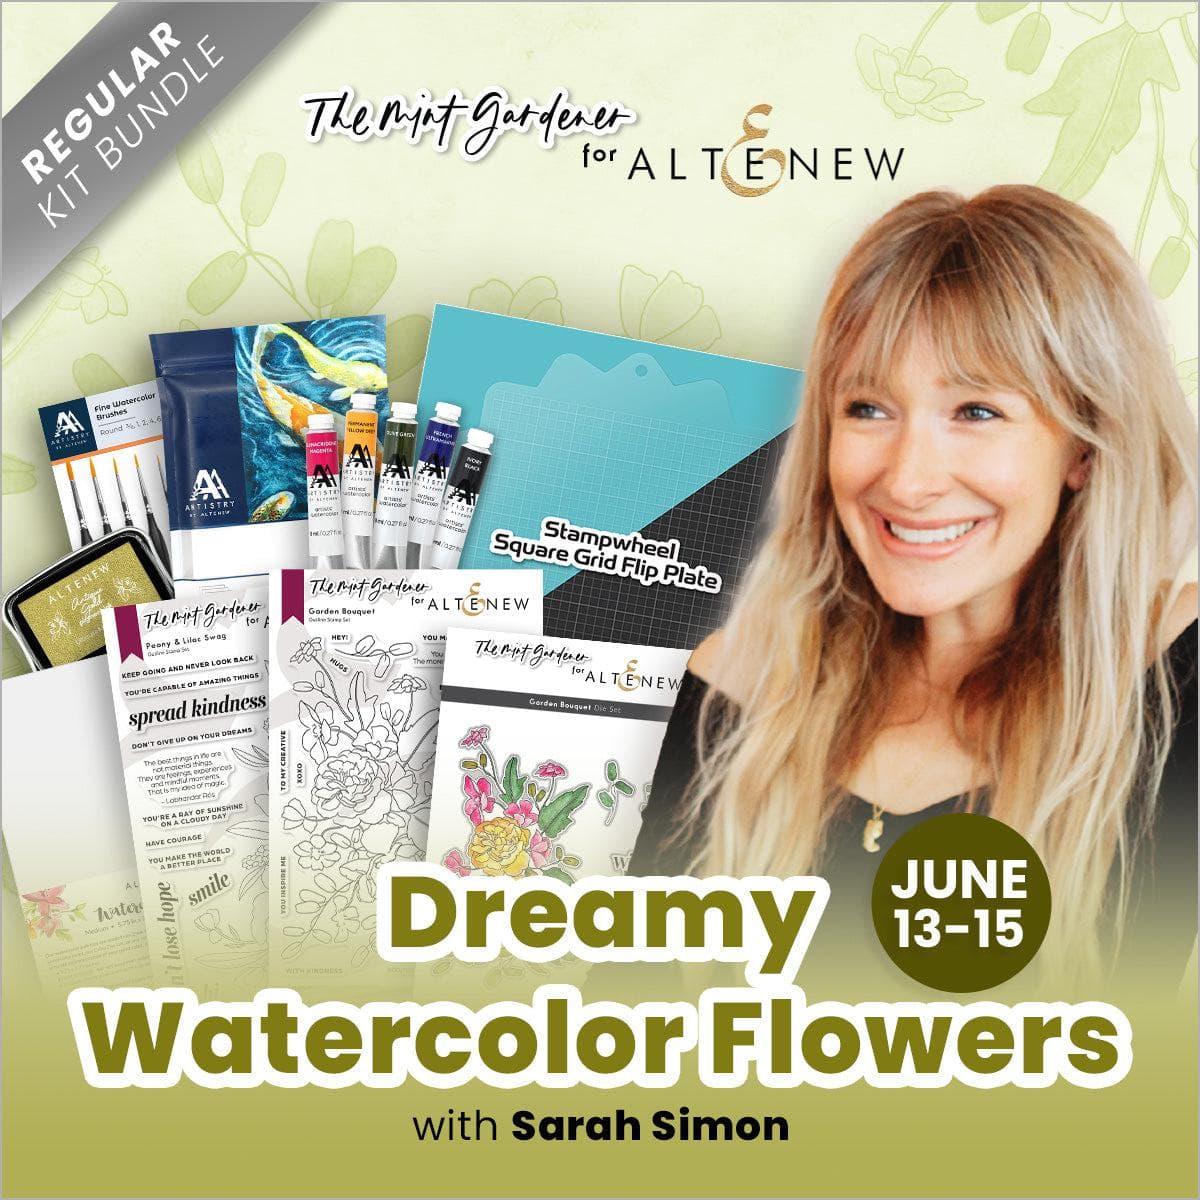 Dreamy Watercolor Flowers with Sarah Simon